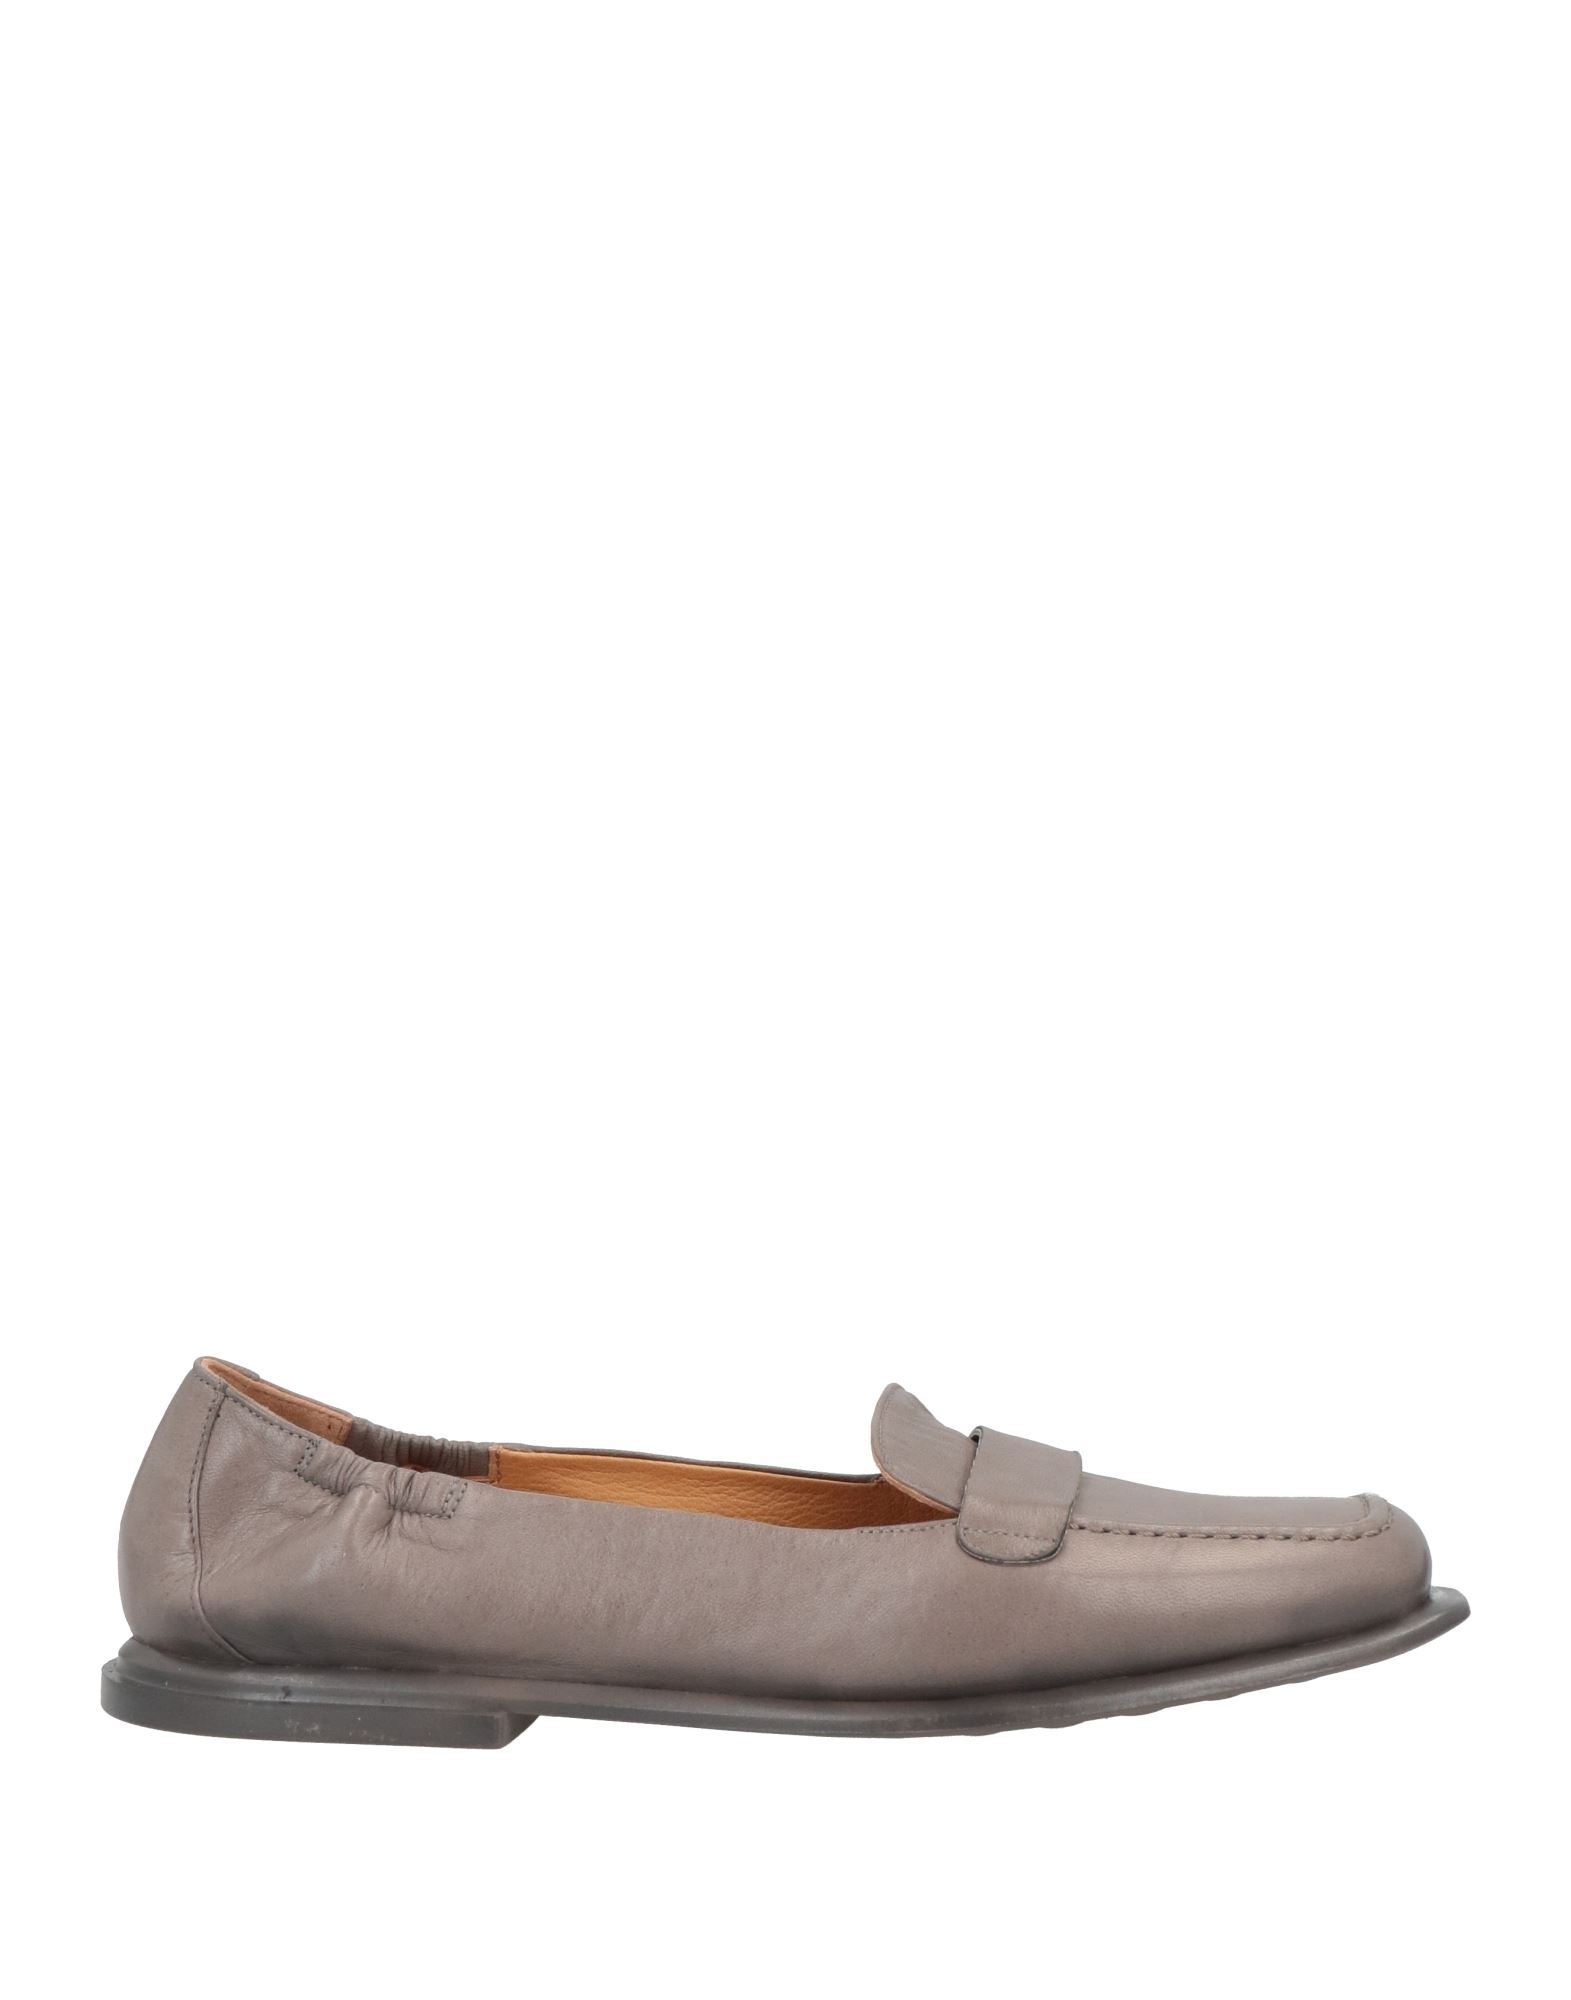 Shop Pomme D'or Woman Loafers Dove Grey Size 7 Soft Leather